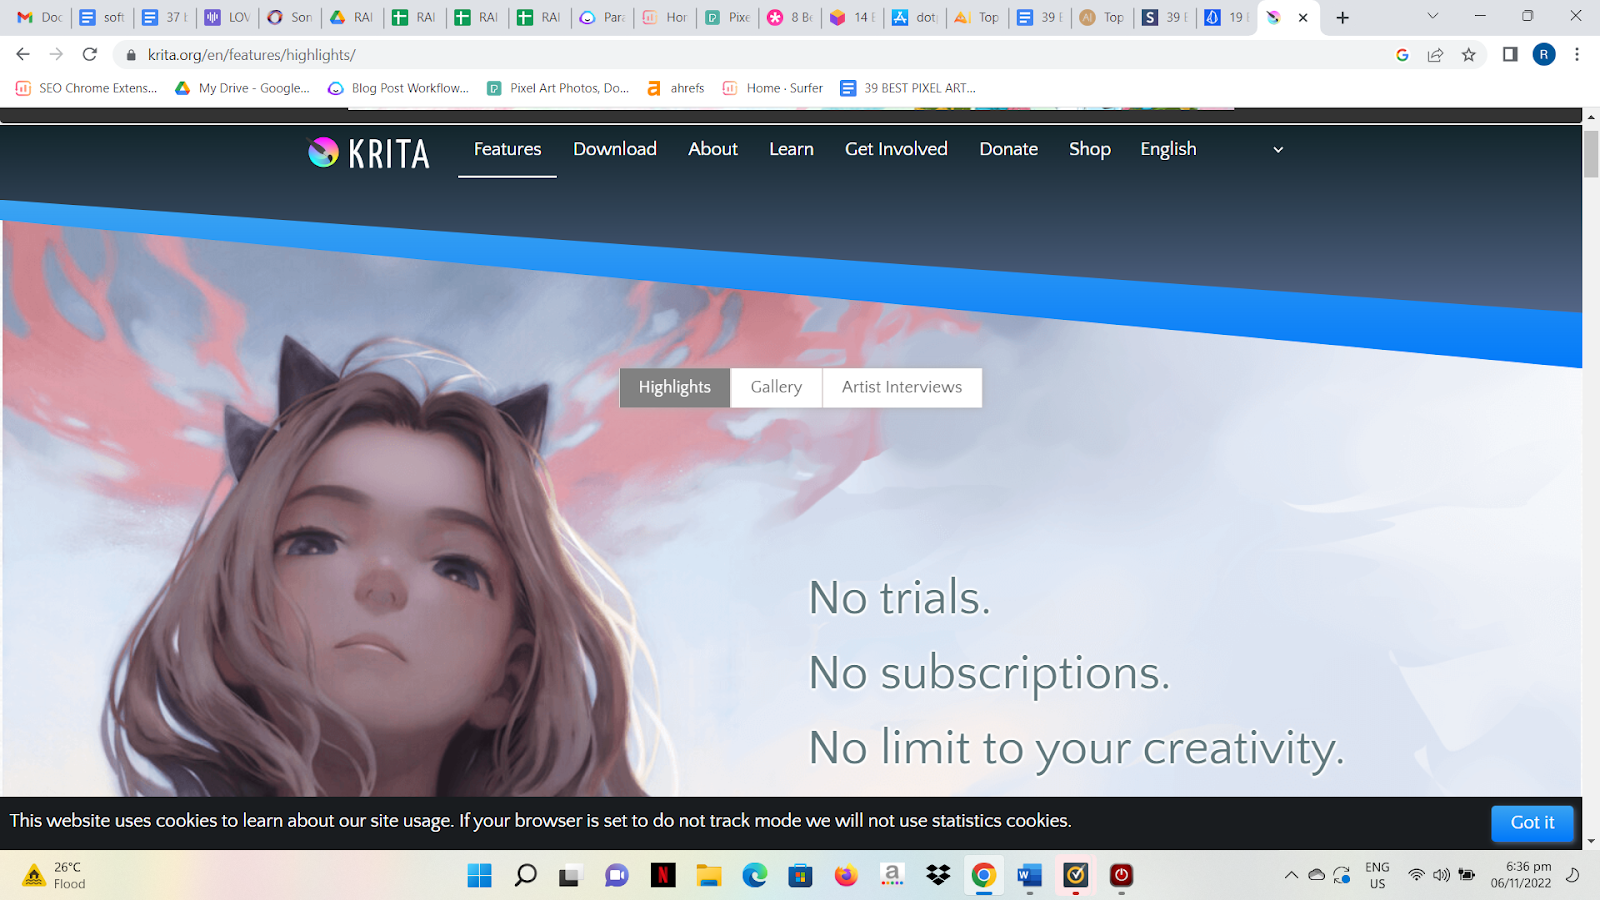 Krita:free and open source application